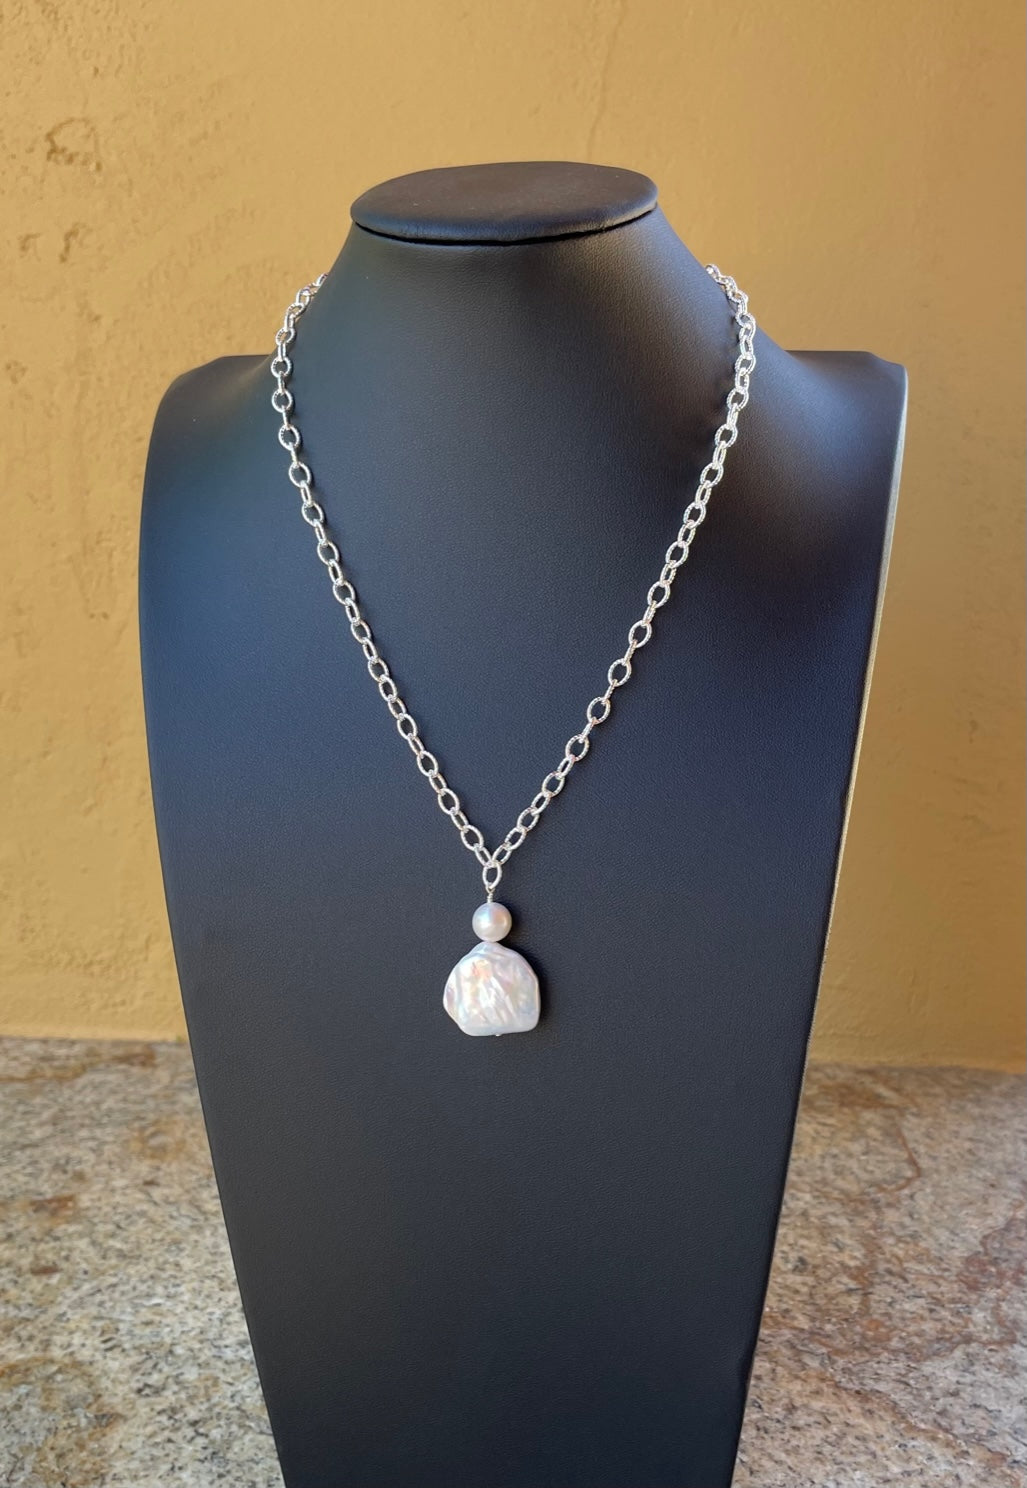 Necklace - sterling silver chain with white two pearl pendant